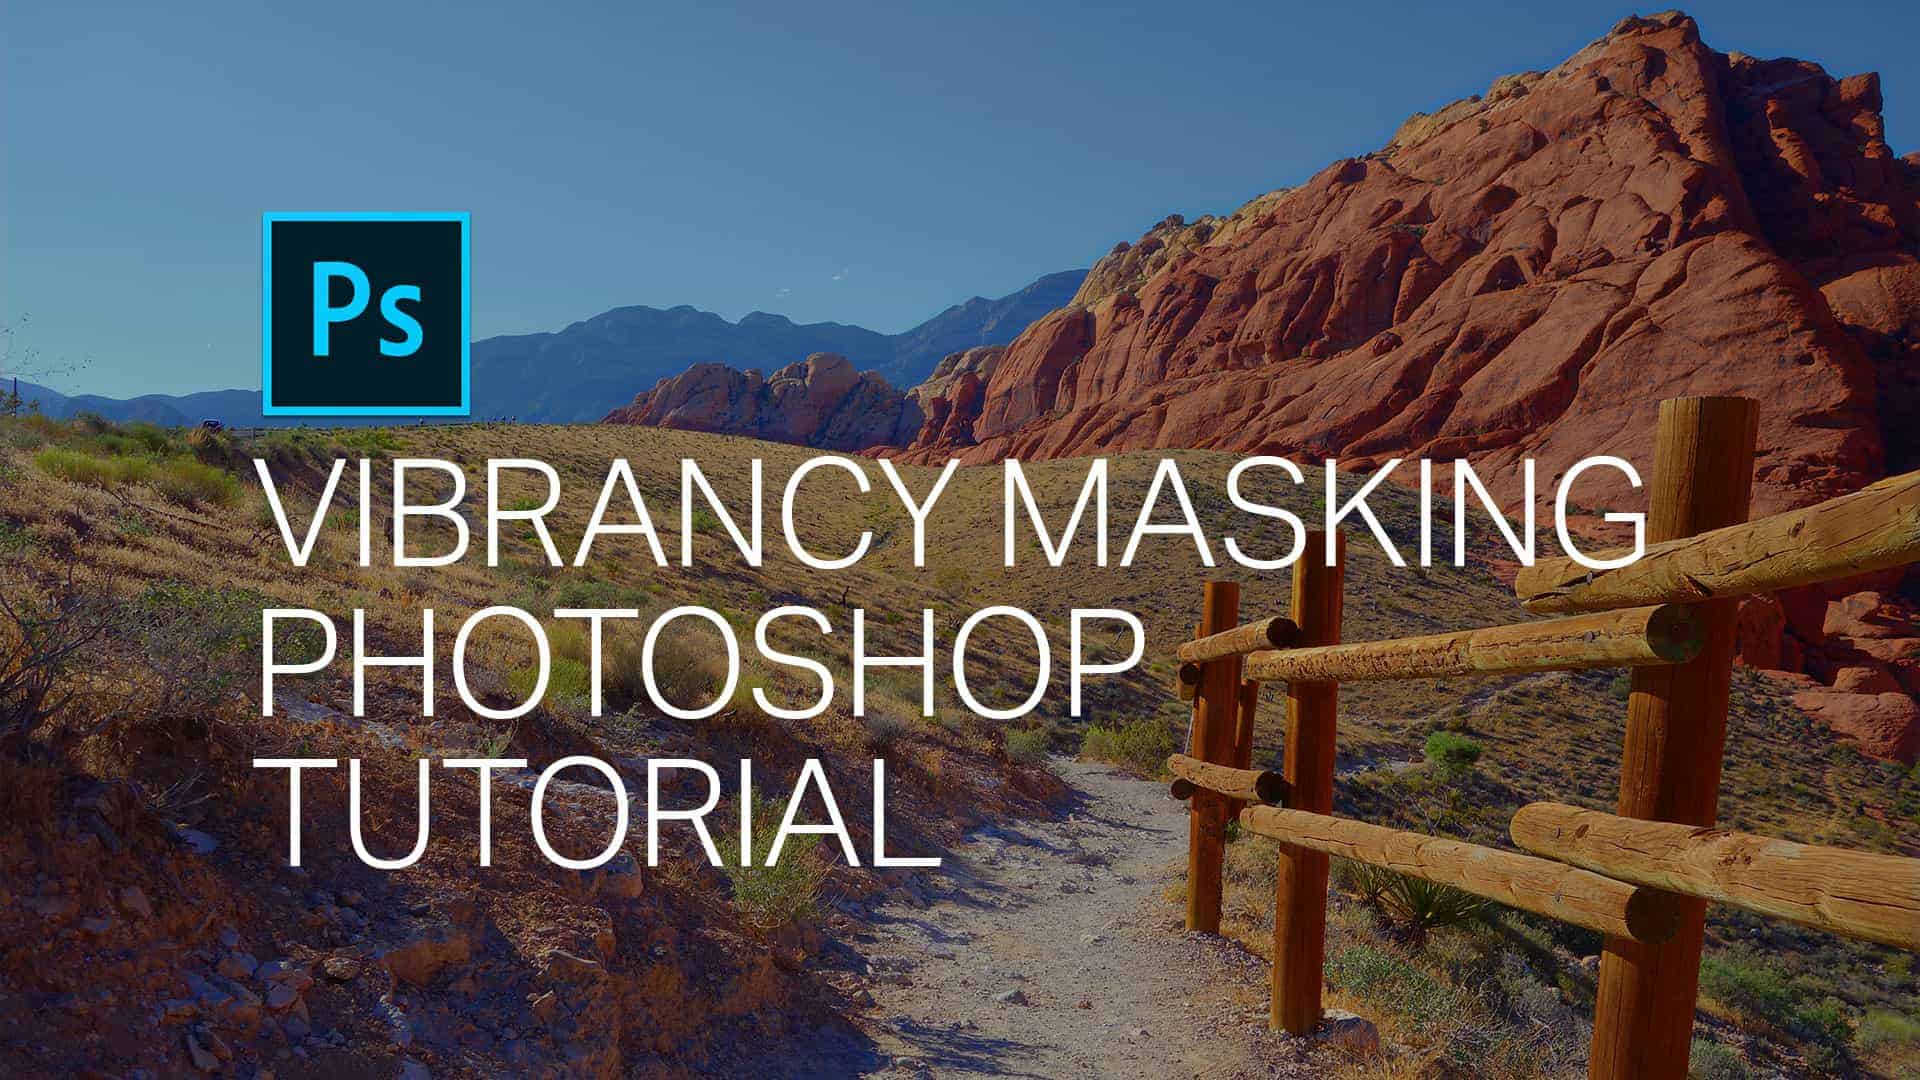 Vibrancy Masking - How to Get Ultra Vibrant Photos in Photoshop